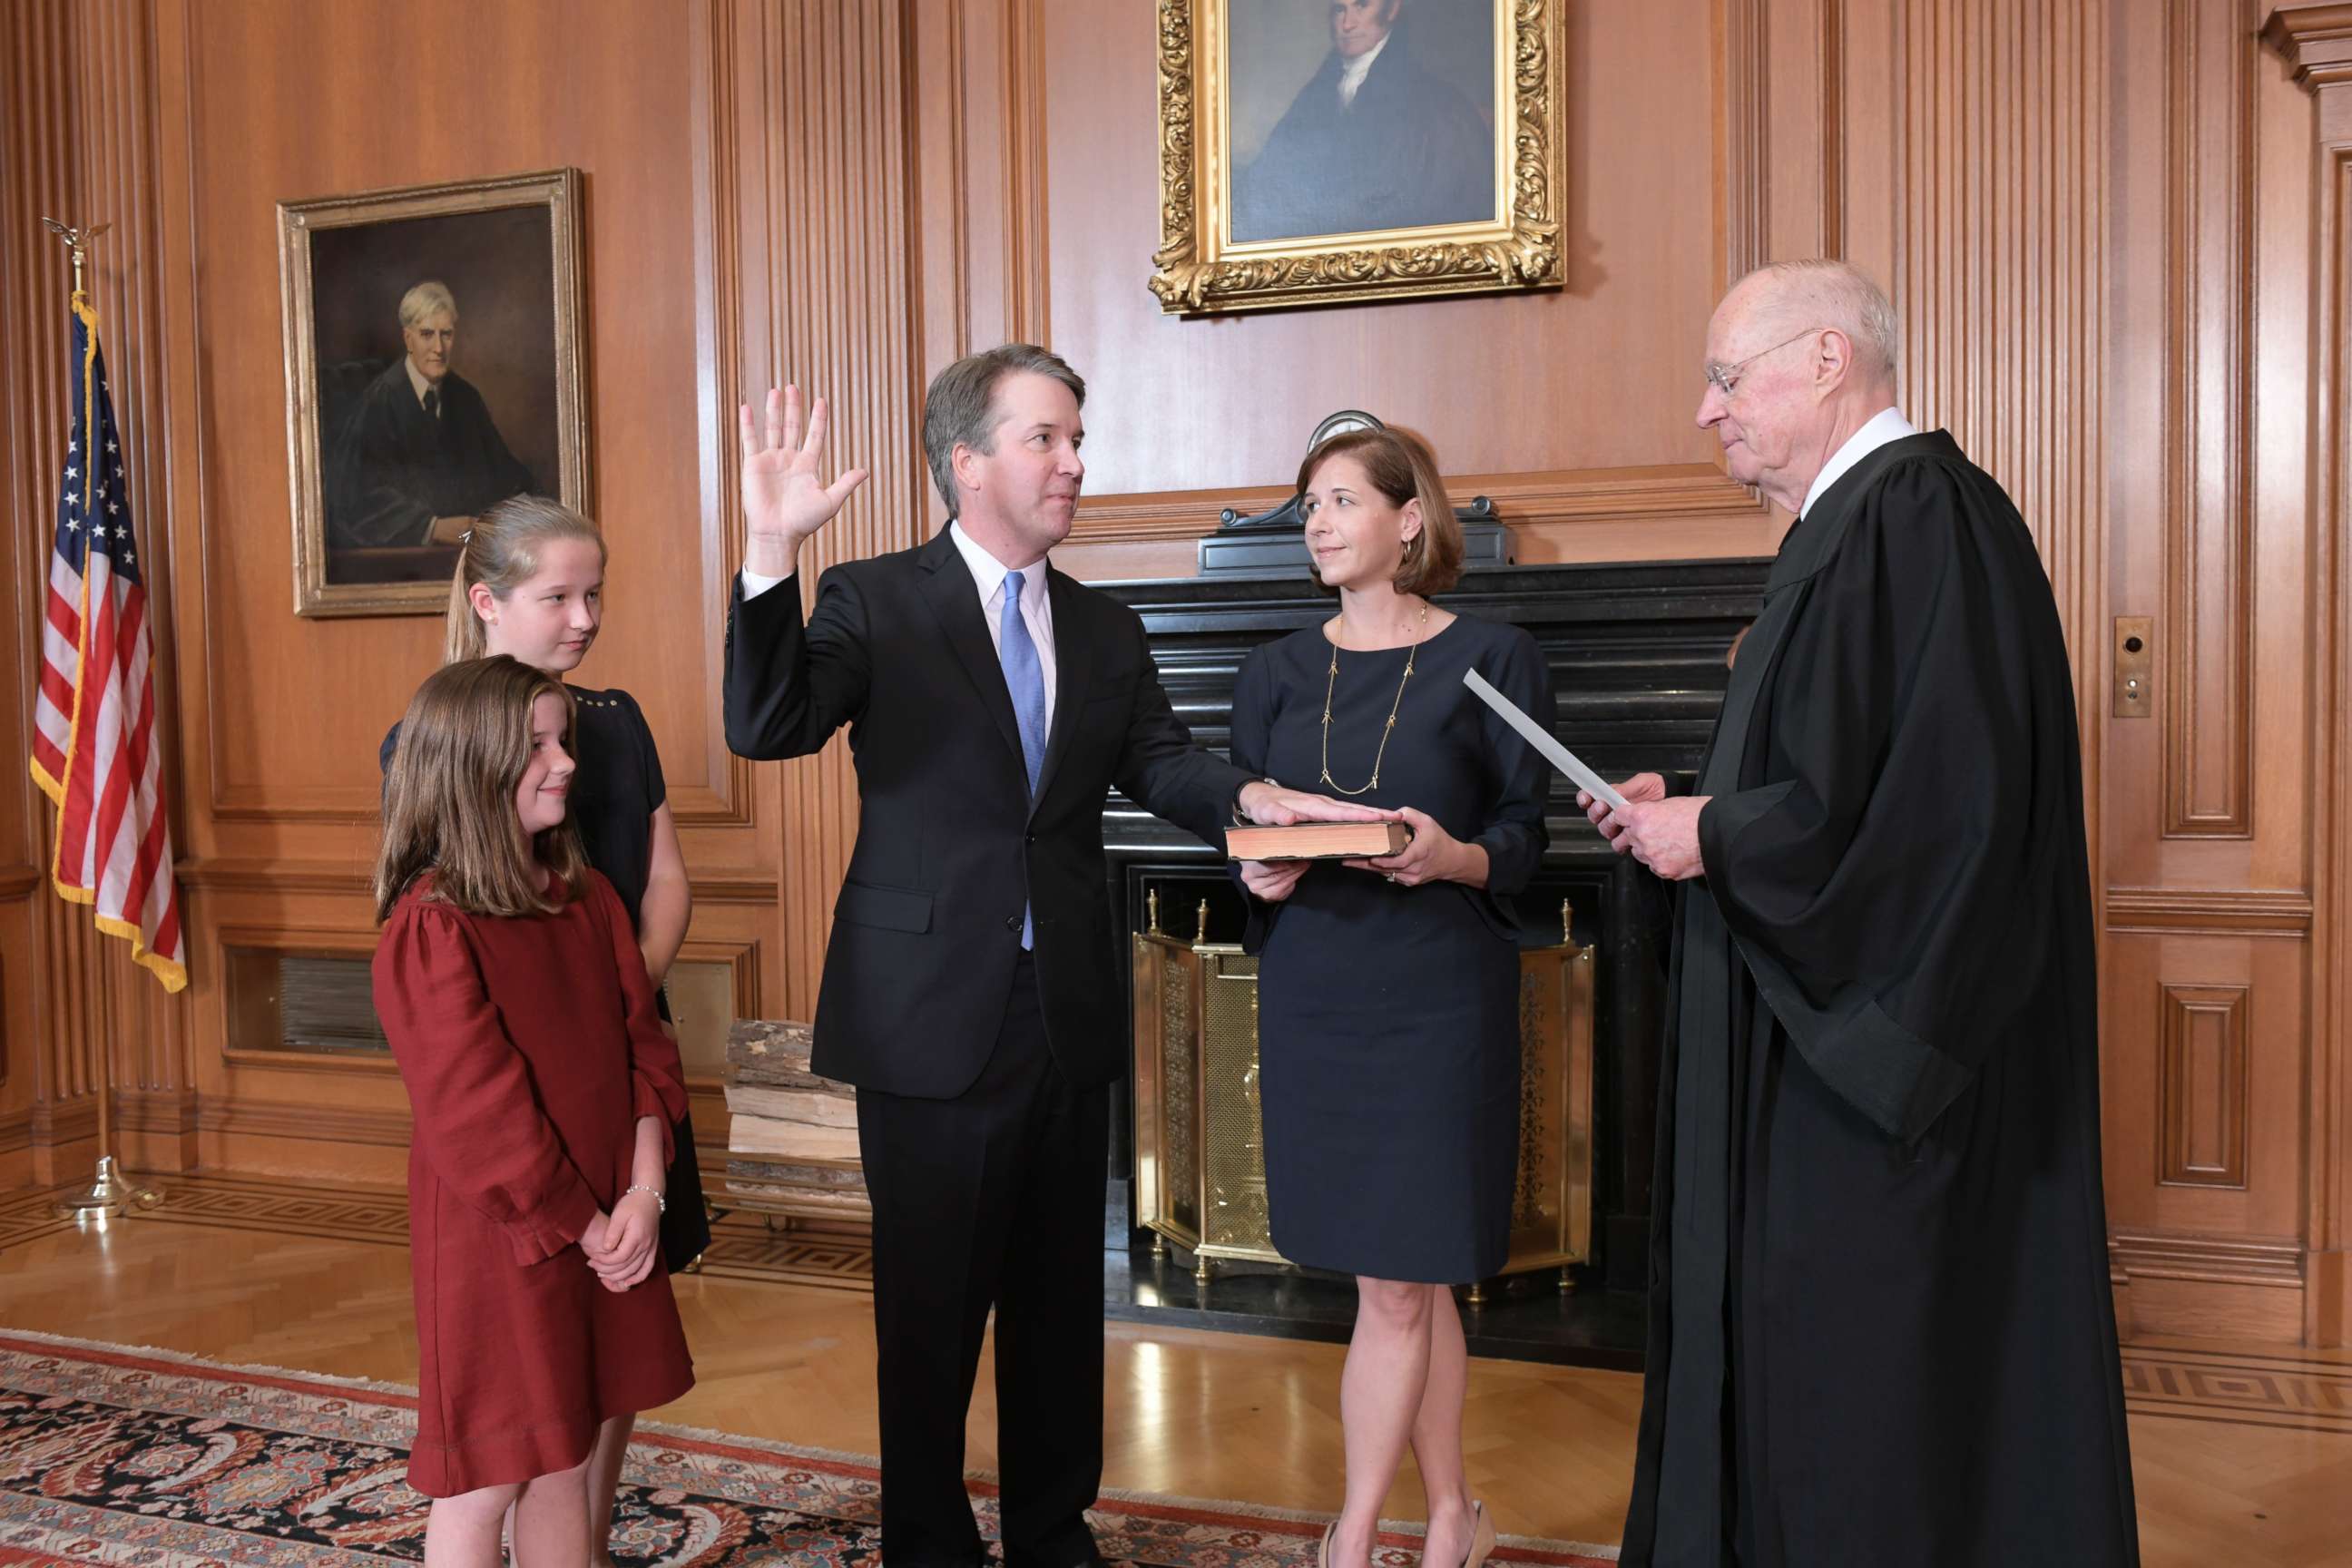 PHOTO: Retired Justice Anthony M. Kennedy, right, administers the Judicial Oath to Judge Brett Kavanaugh in the Justices' Conference Room of the Supreme Court Building, Oct. 6, 2018.